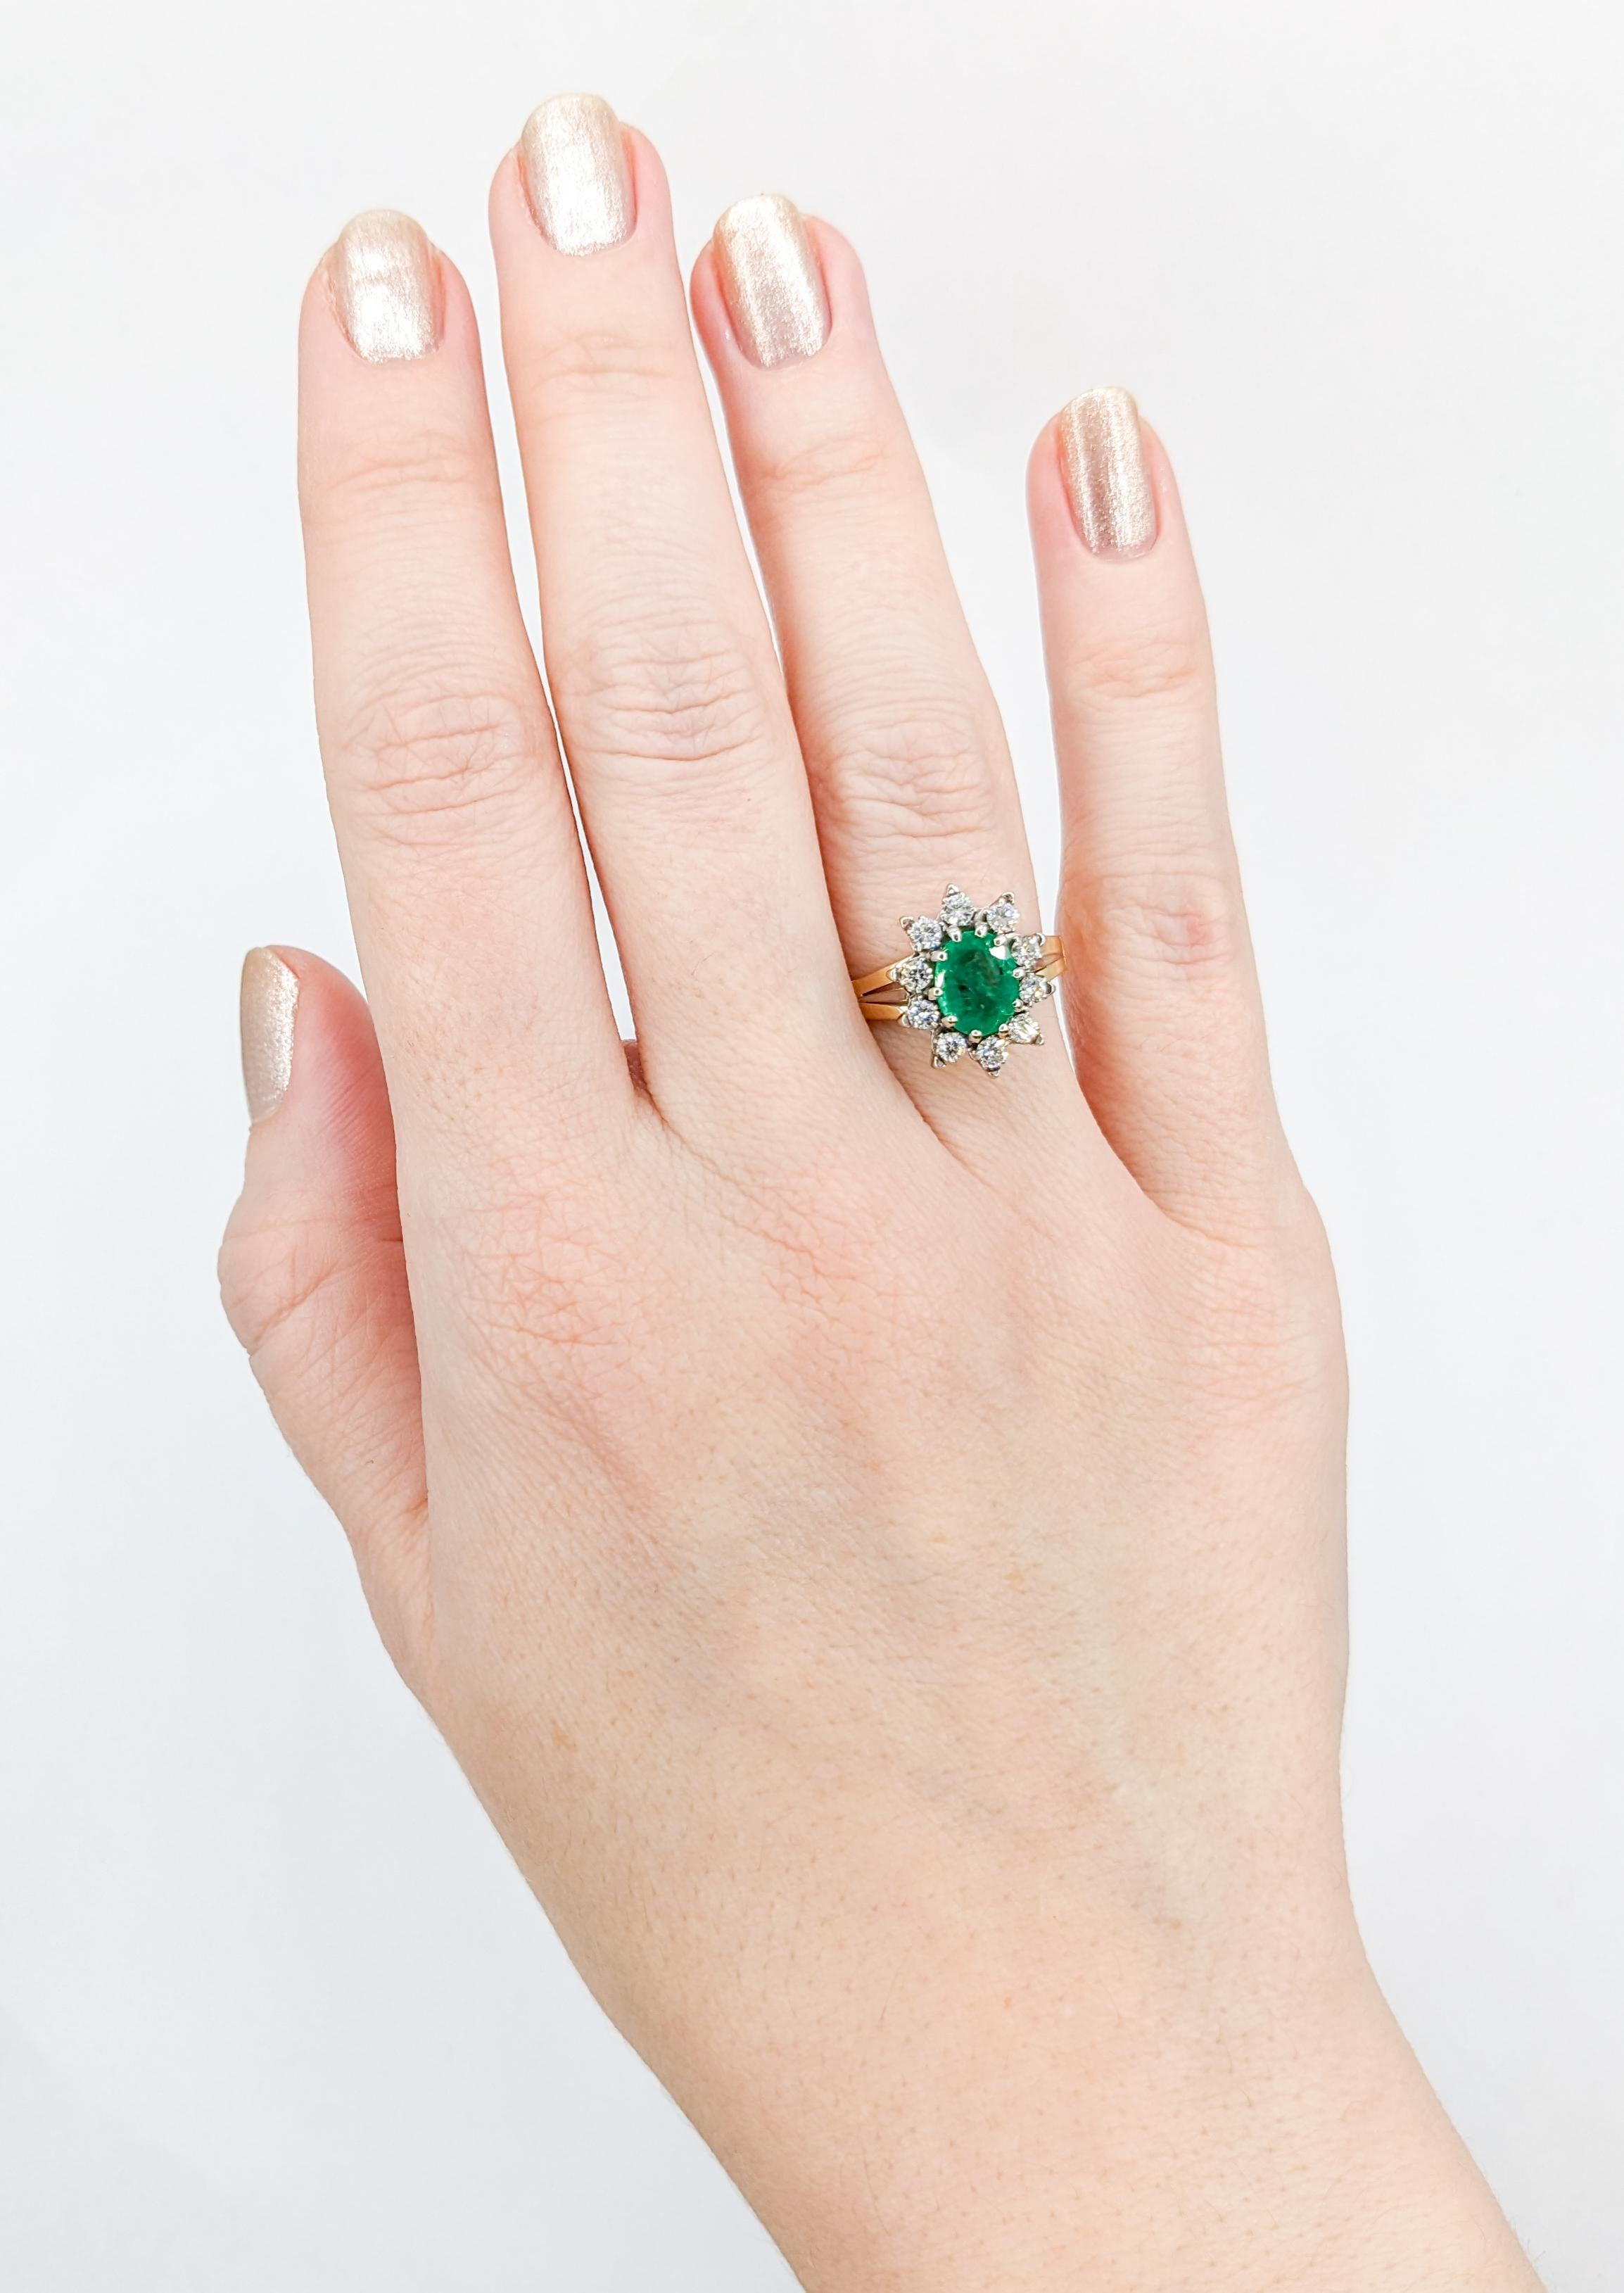 Divine Vintage Emerald & Diamond Ring in 18K Gold

Elegance meets vintage charm in this exquisite emerald ring, expertly handcrafted from radiant 18-karat yellow gold with a white gold setting. This vintage masterpiece features a resplendent